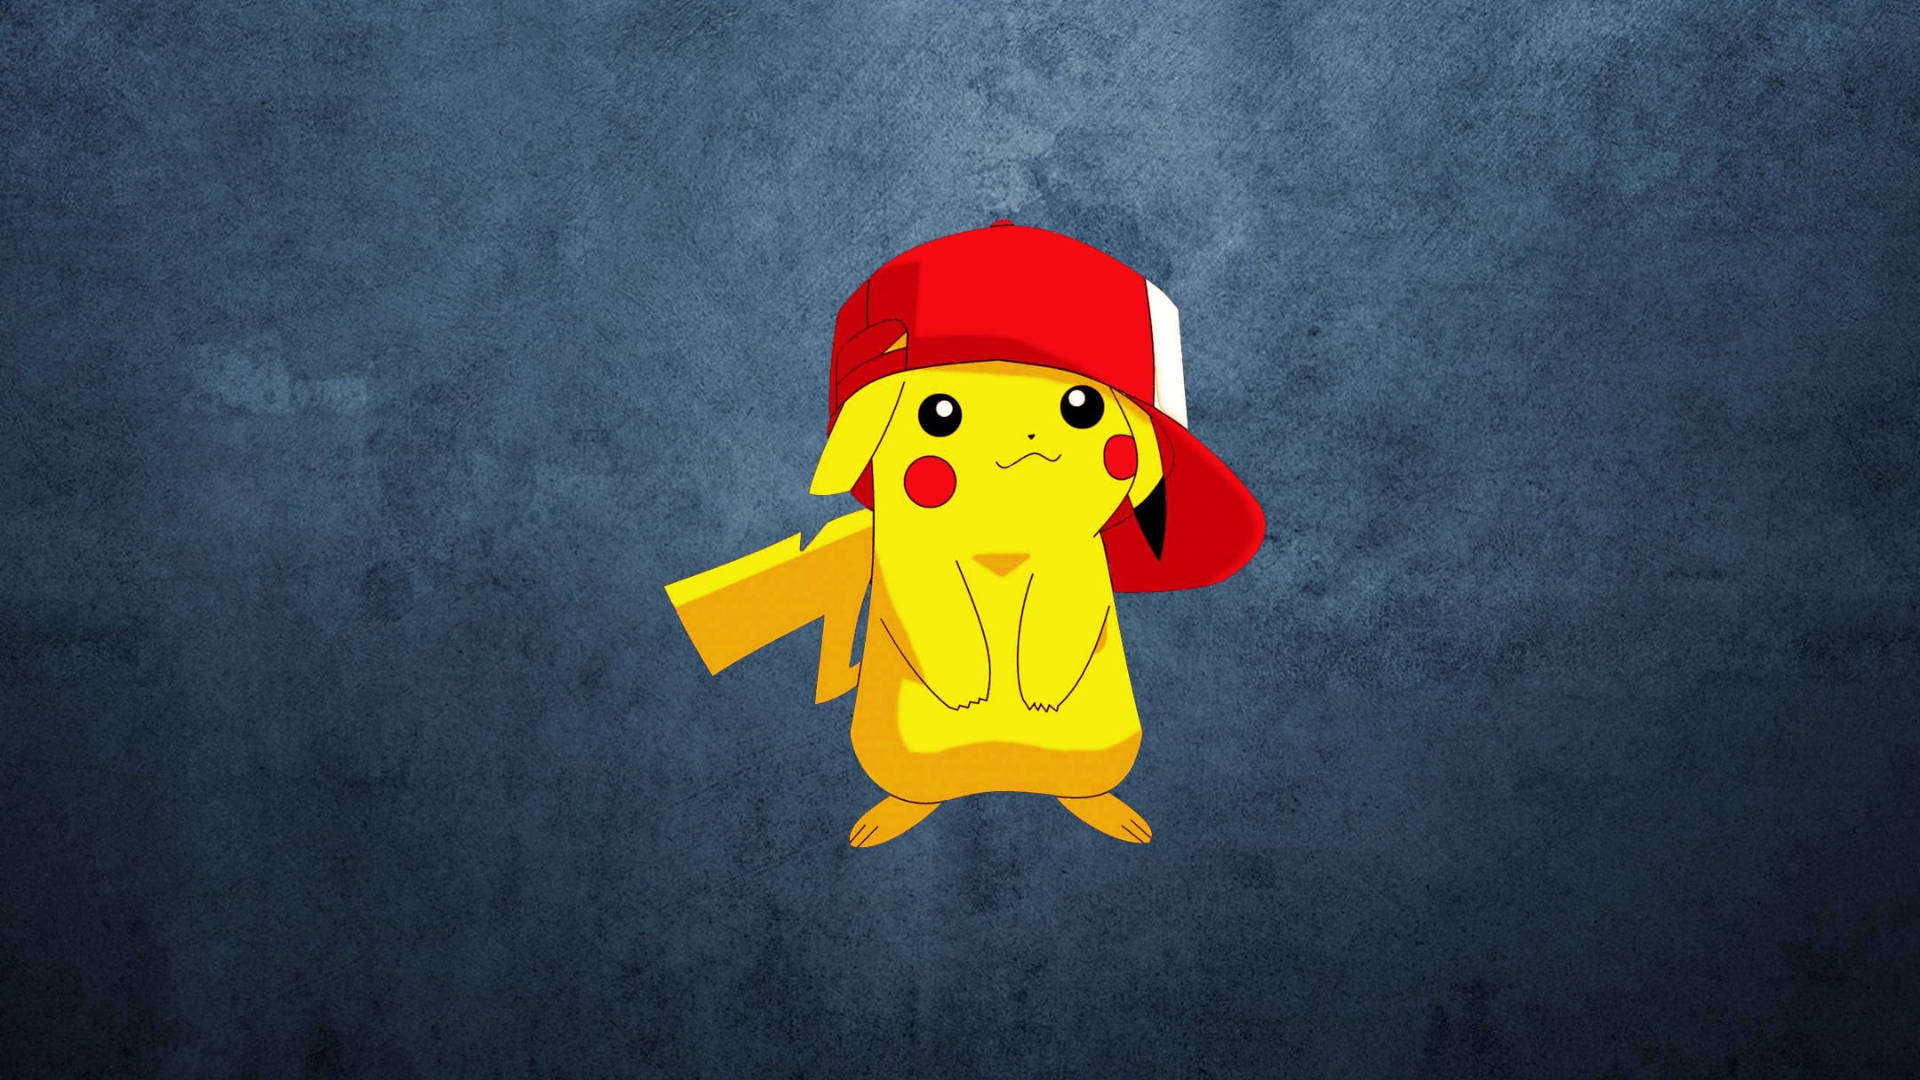 Cool And Cute Pikachu Pokemon Character Picture